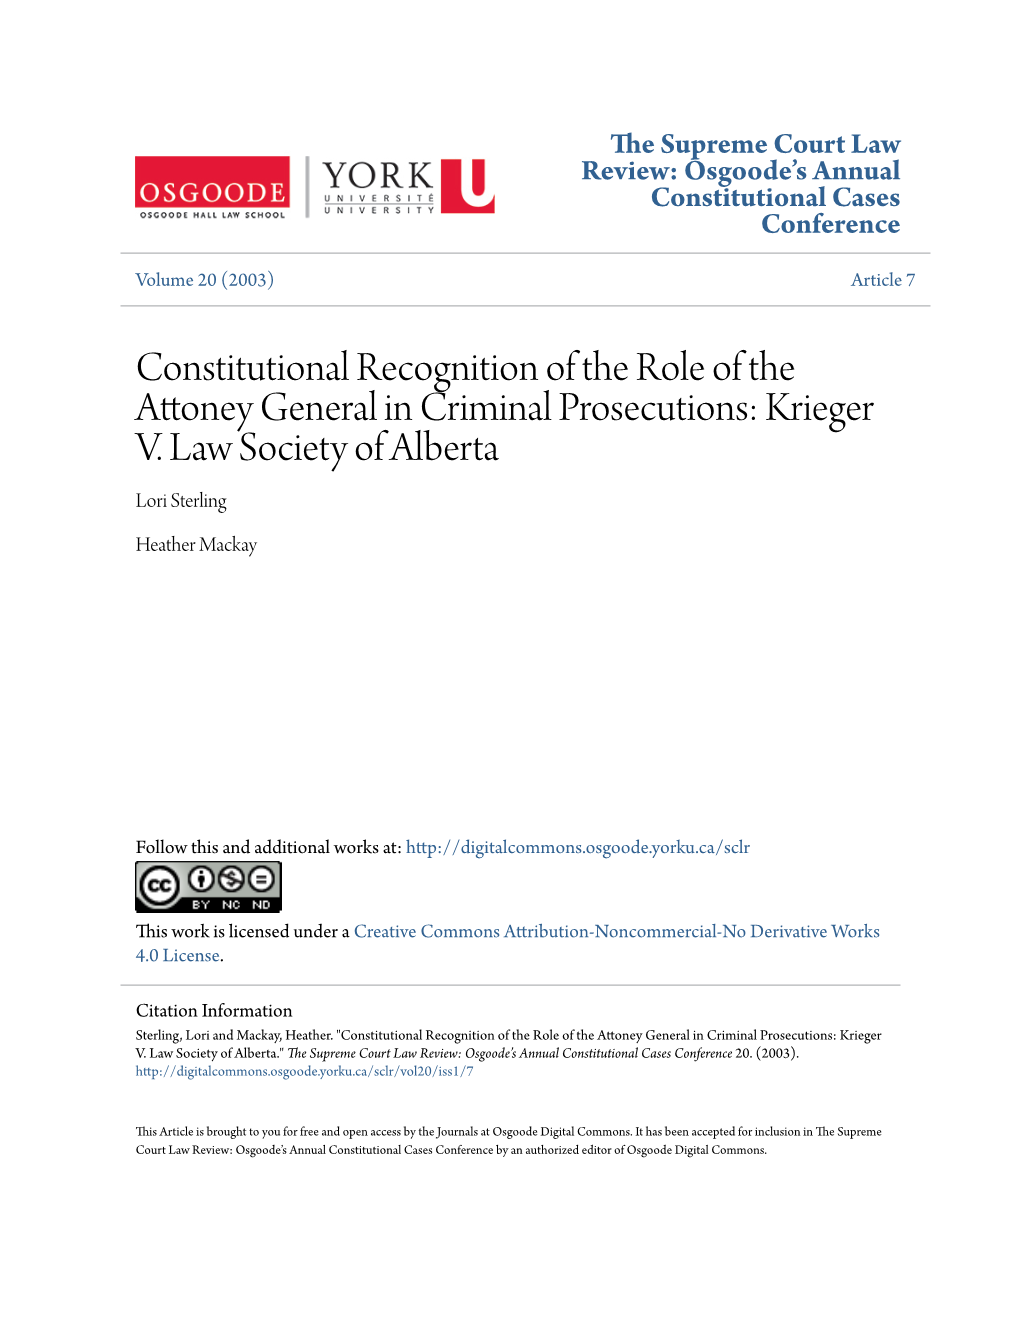 Constitutional Recognition of the Role of the Attoney General in Criminal Prosecutions: Krieger V. Law Society of Alberta Lori Sterling